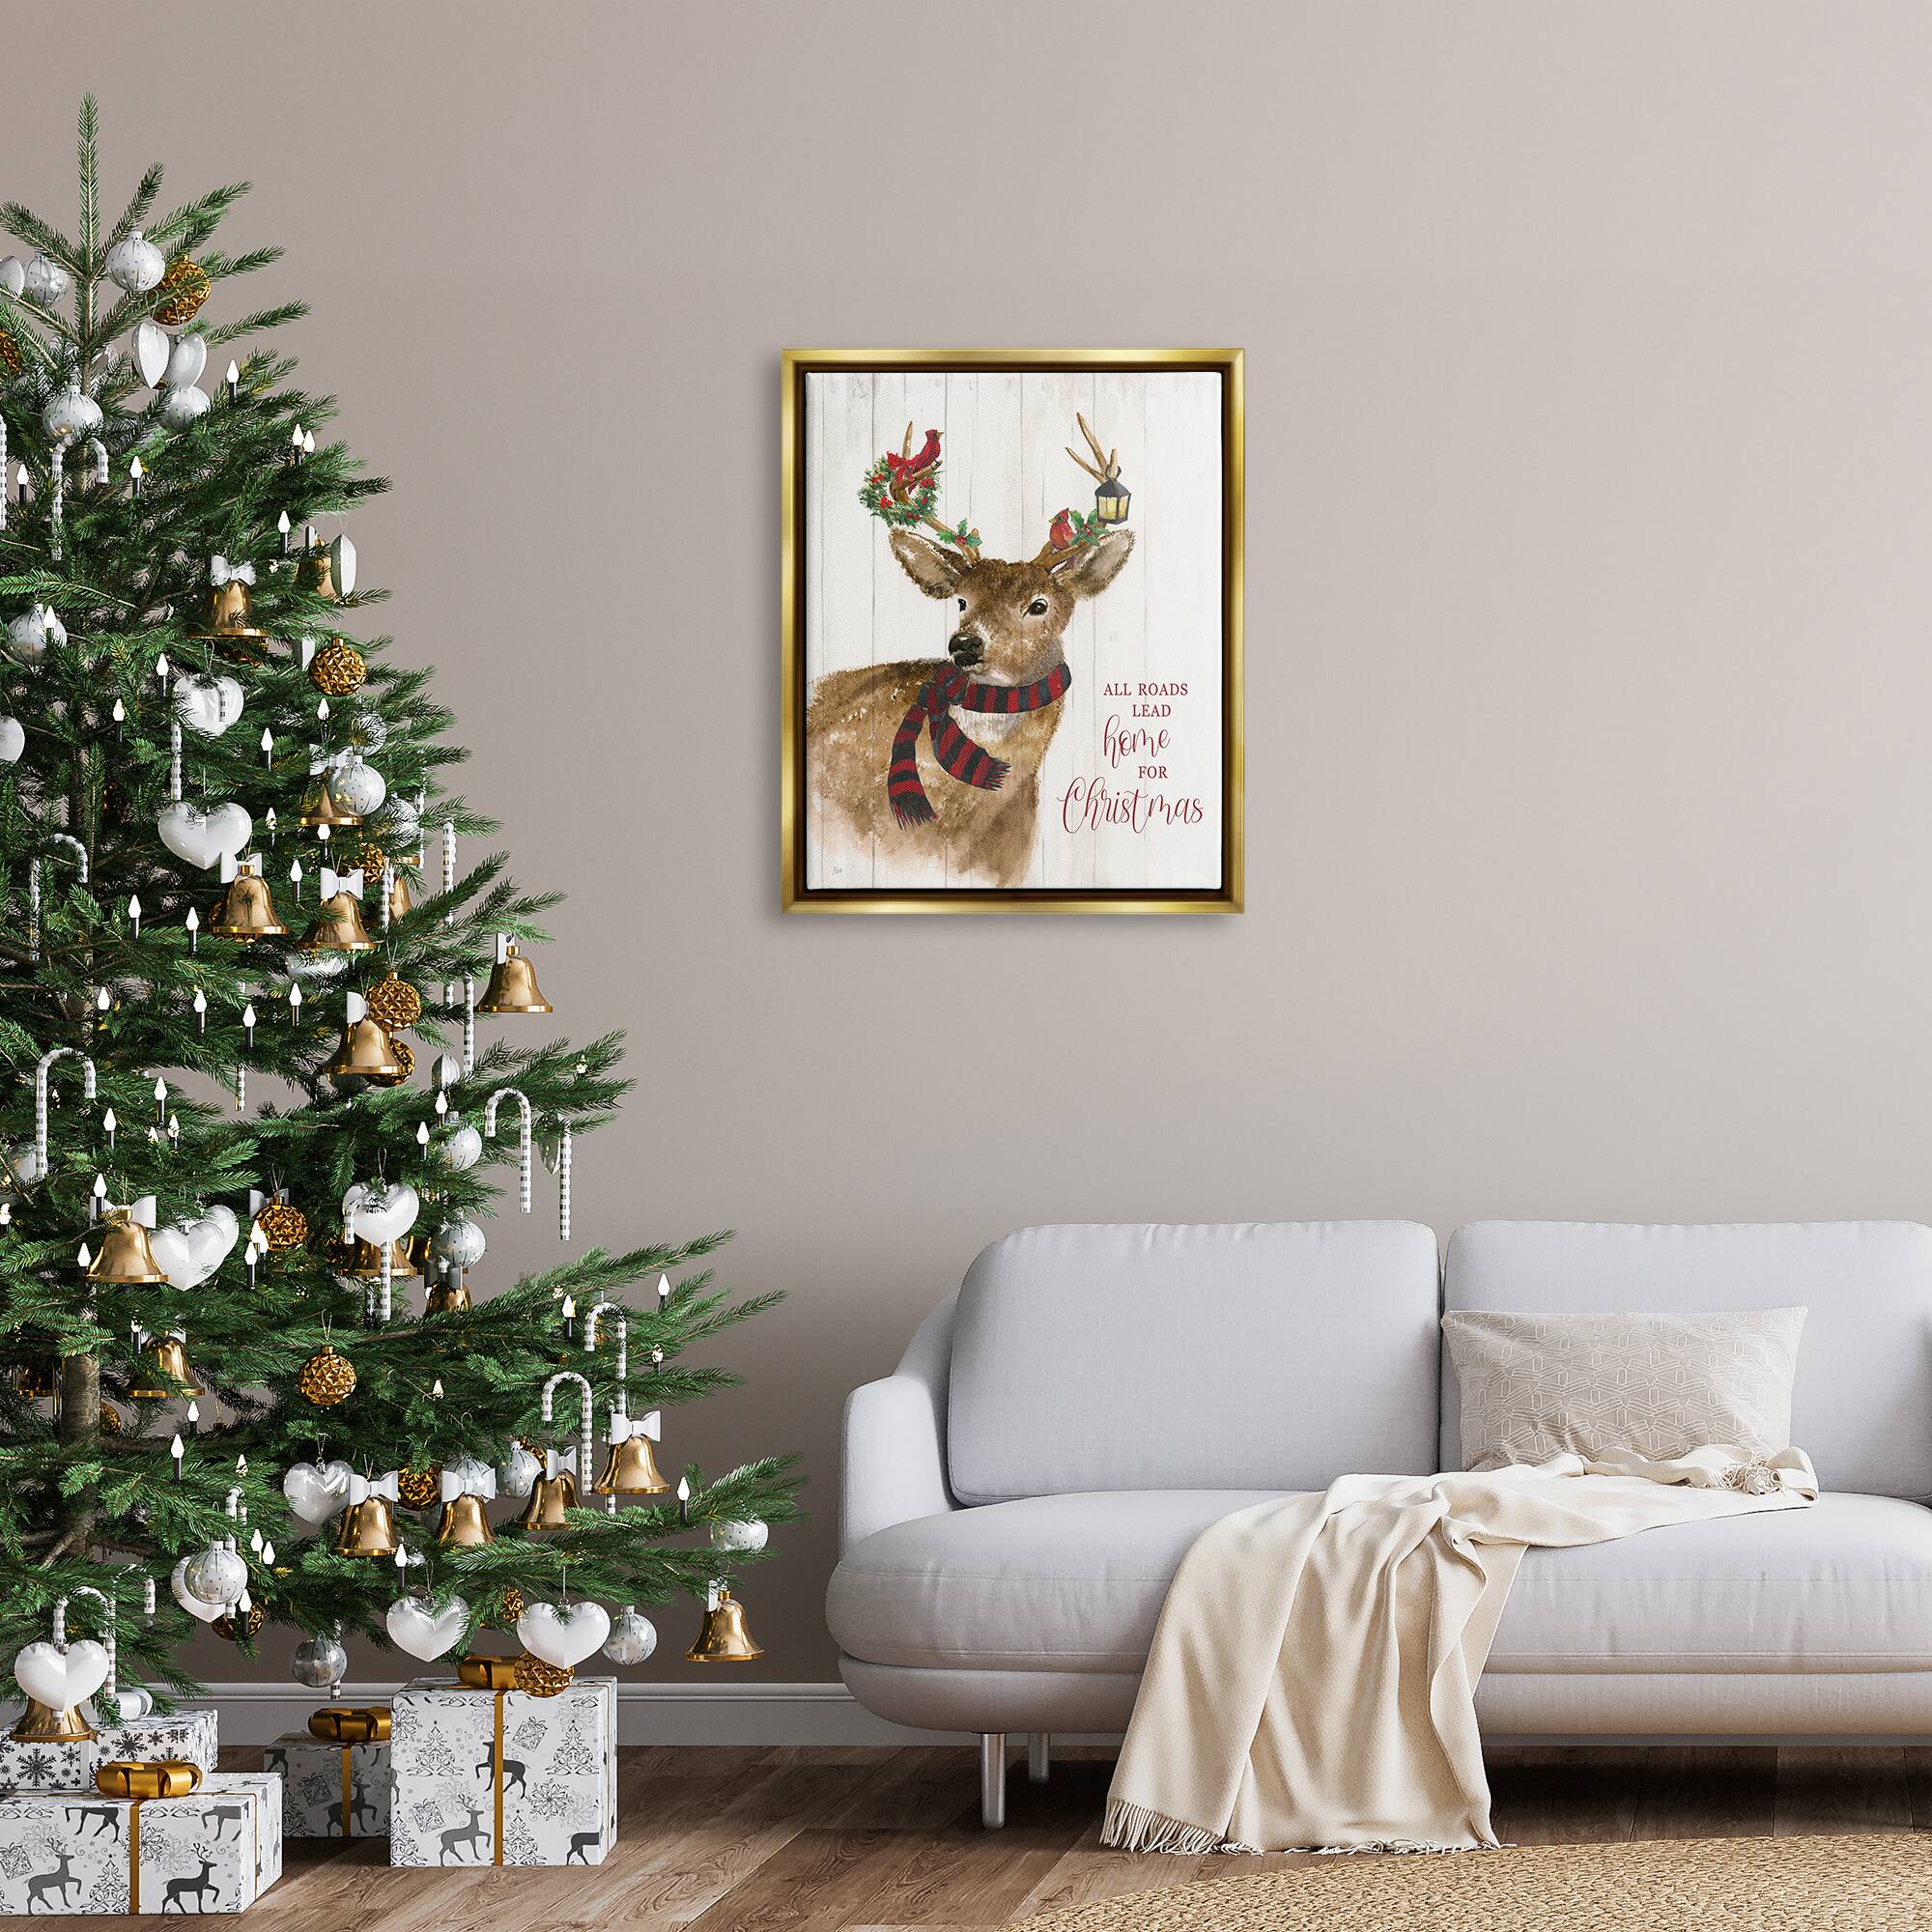 Stupell Industries All Roads Lead Home Christmas Deer Framed Floater Canvas Wall Art